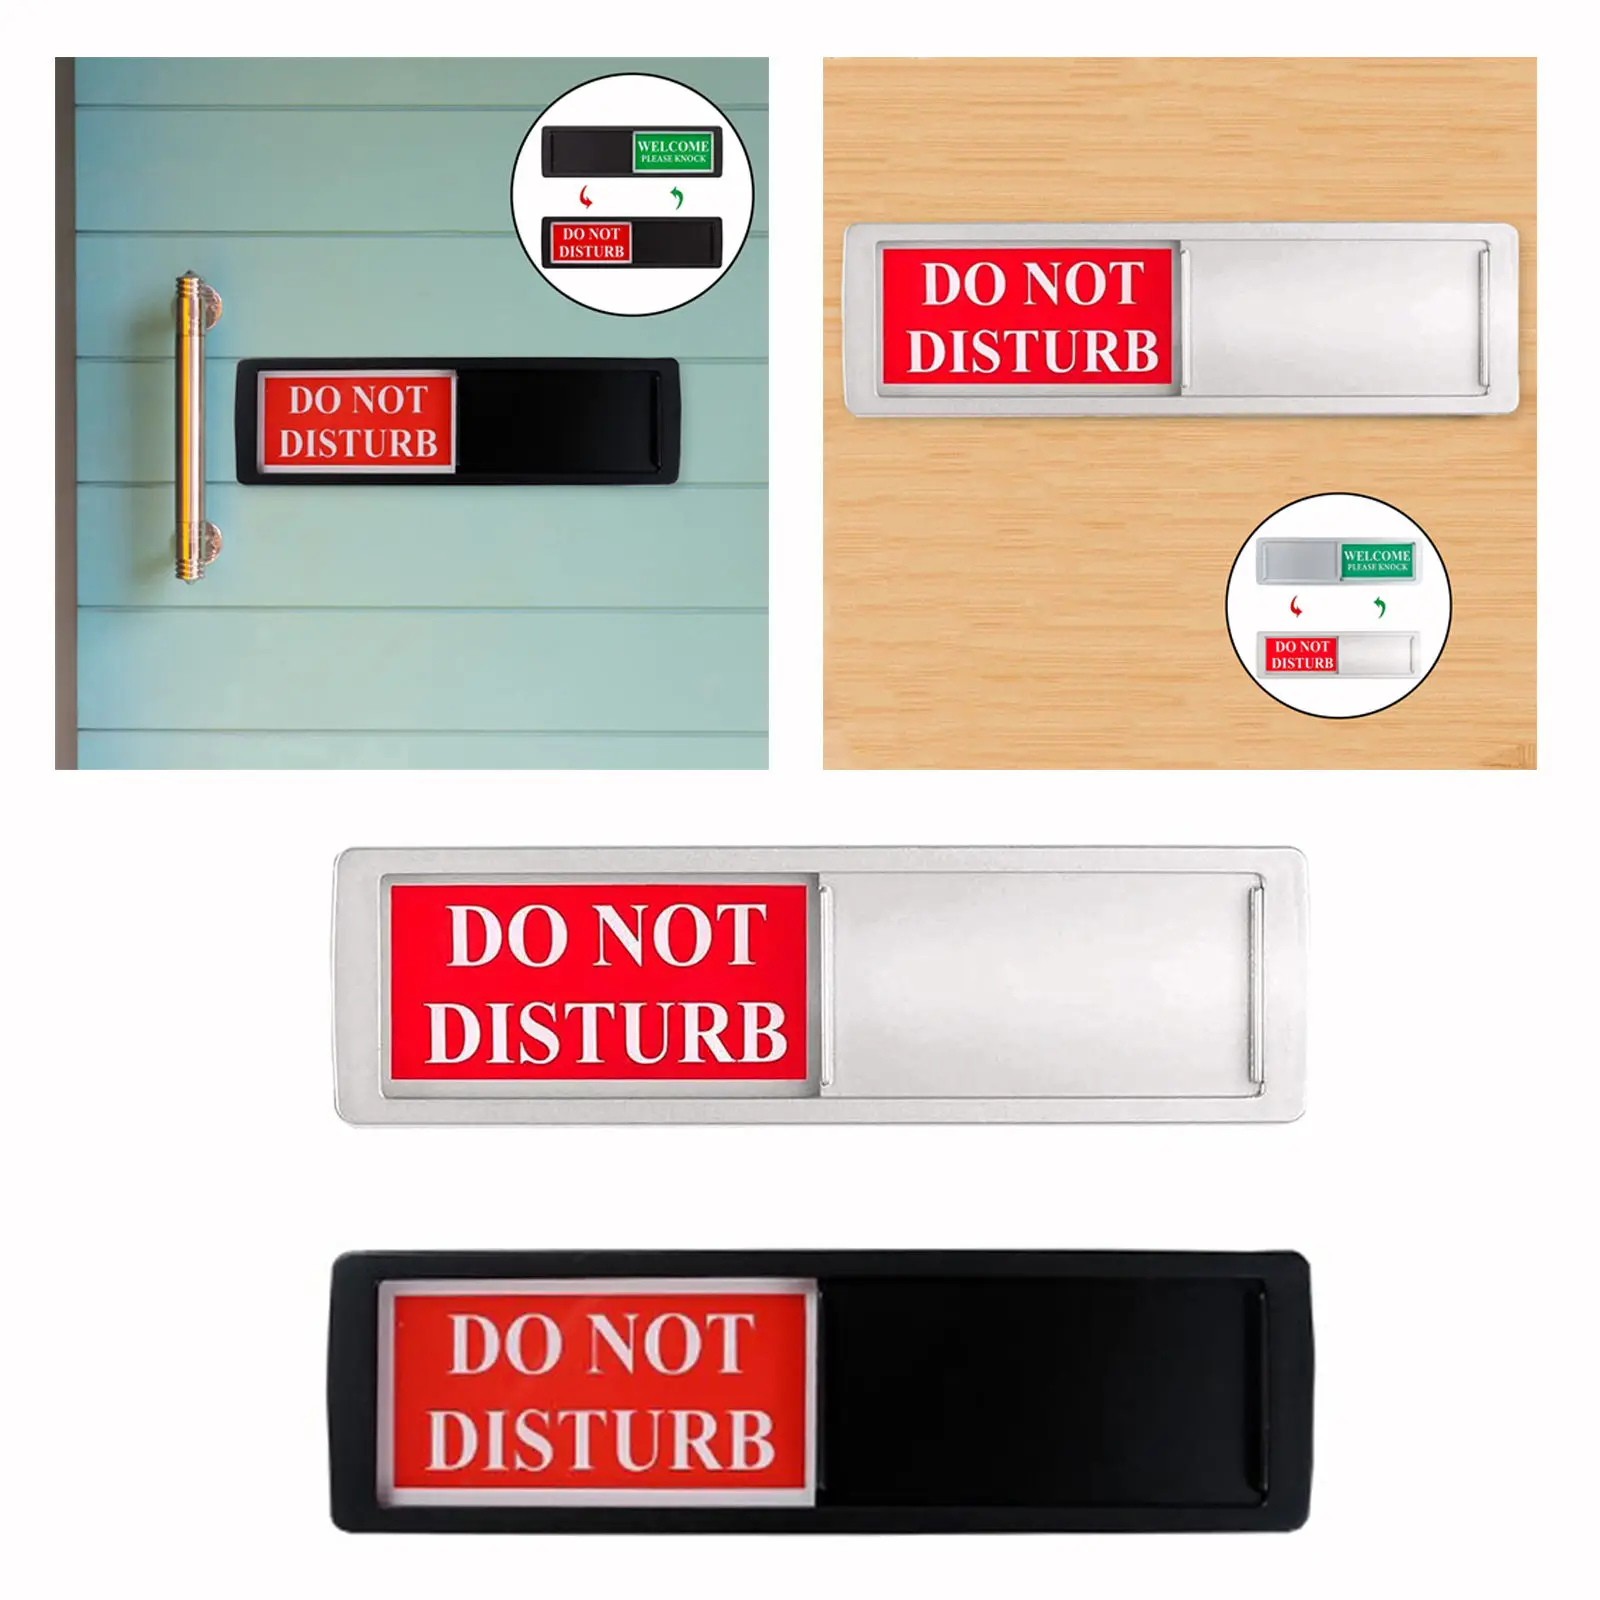 SELF ADHESIVE  TELEPHONE / DOOR SIGNS FOR HOTEL PUB RESTAURANT CAFE OFFICE 